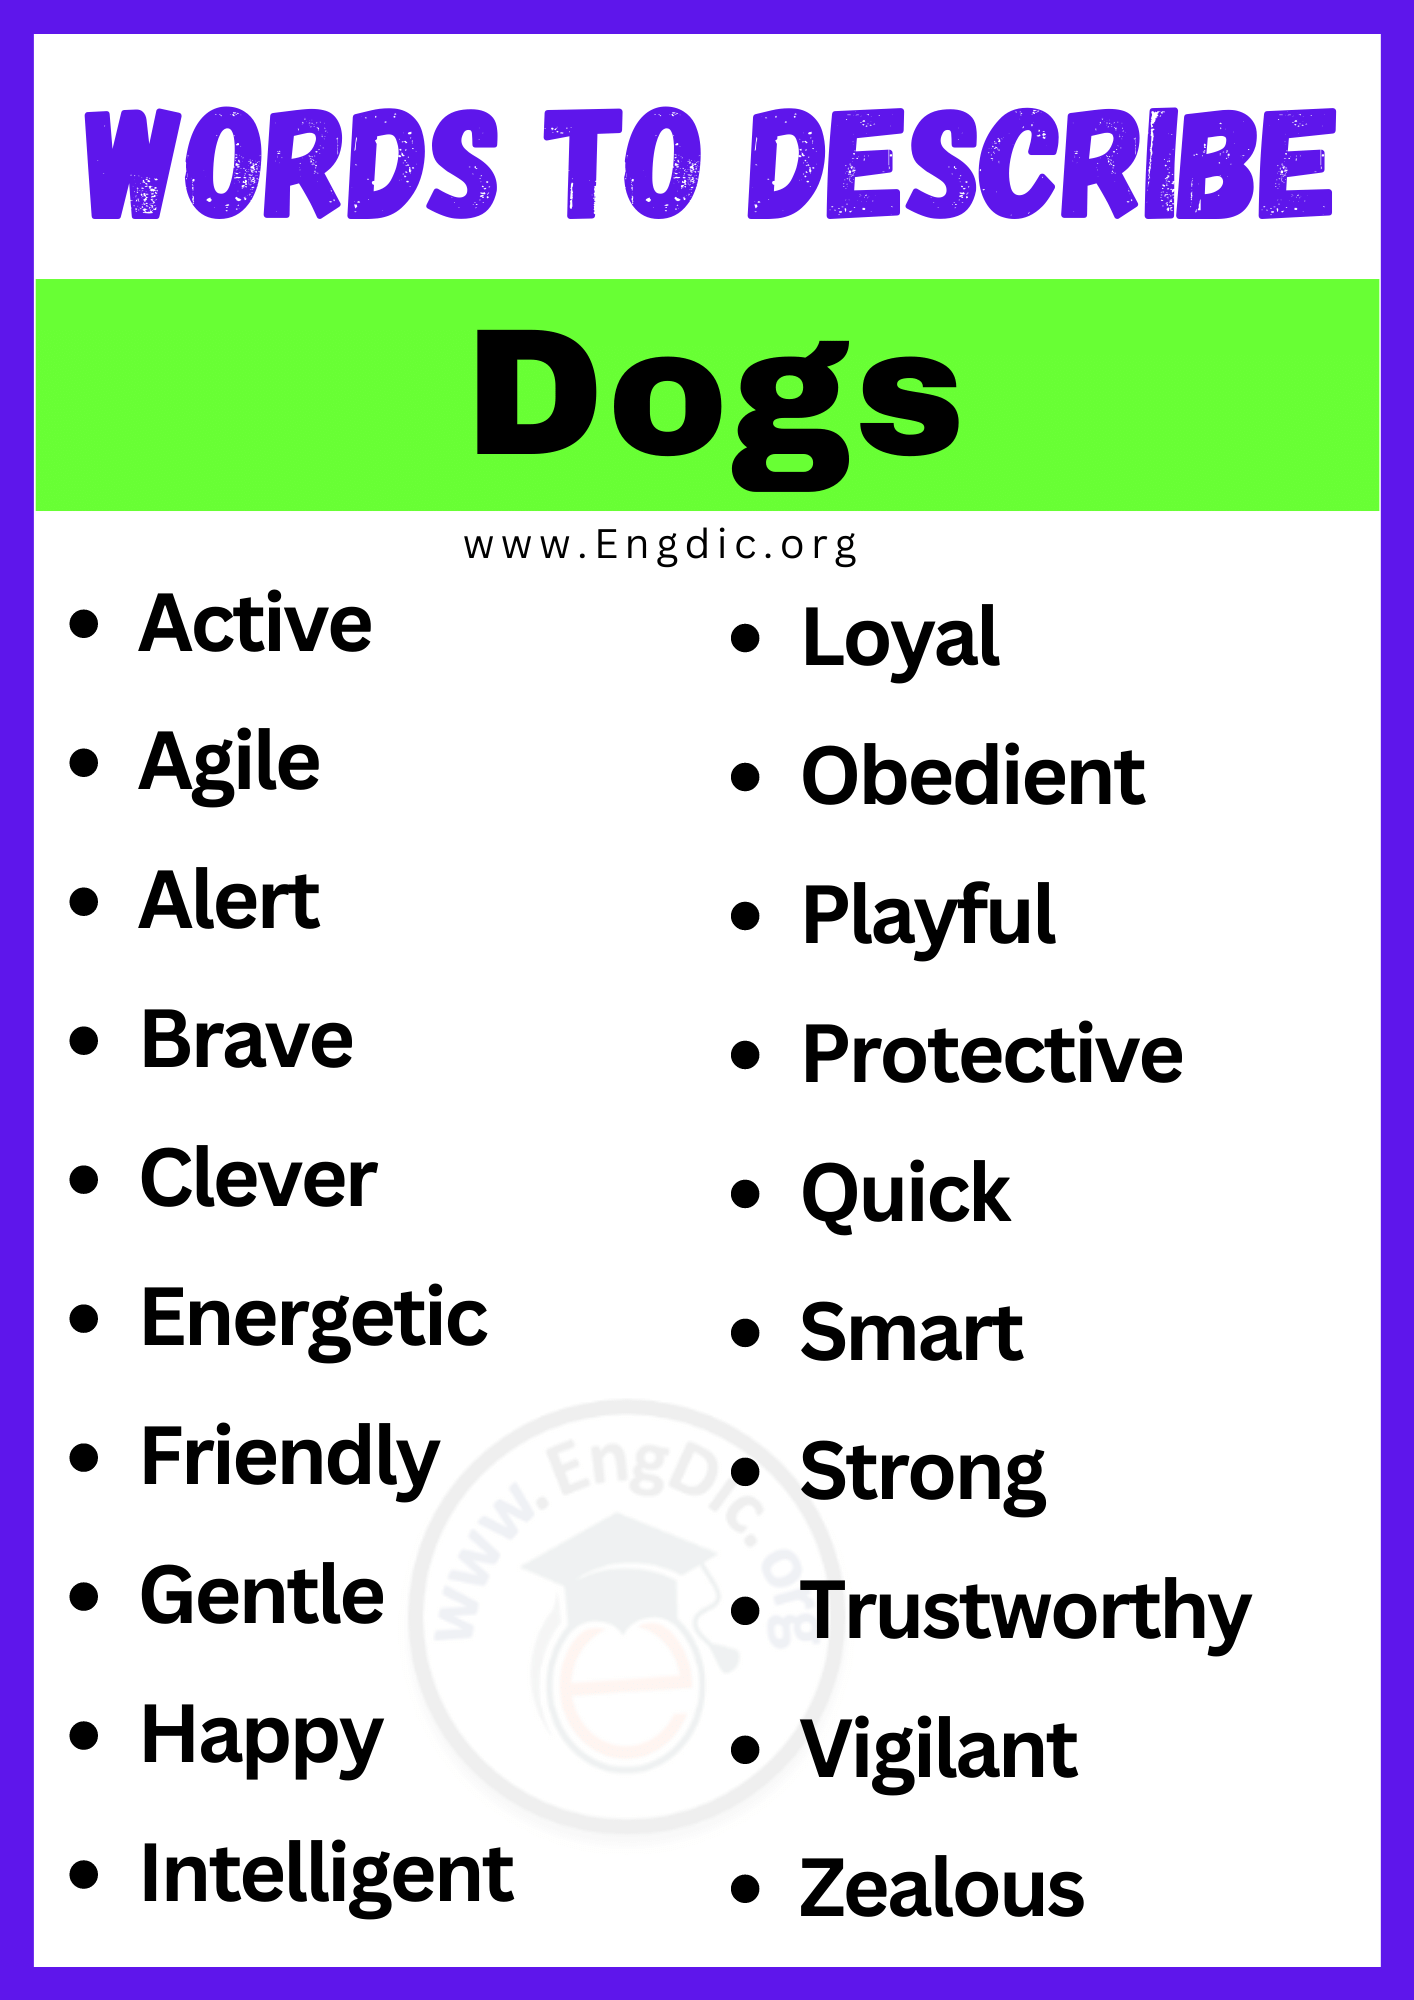 Words to Describe Dogs